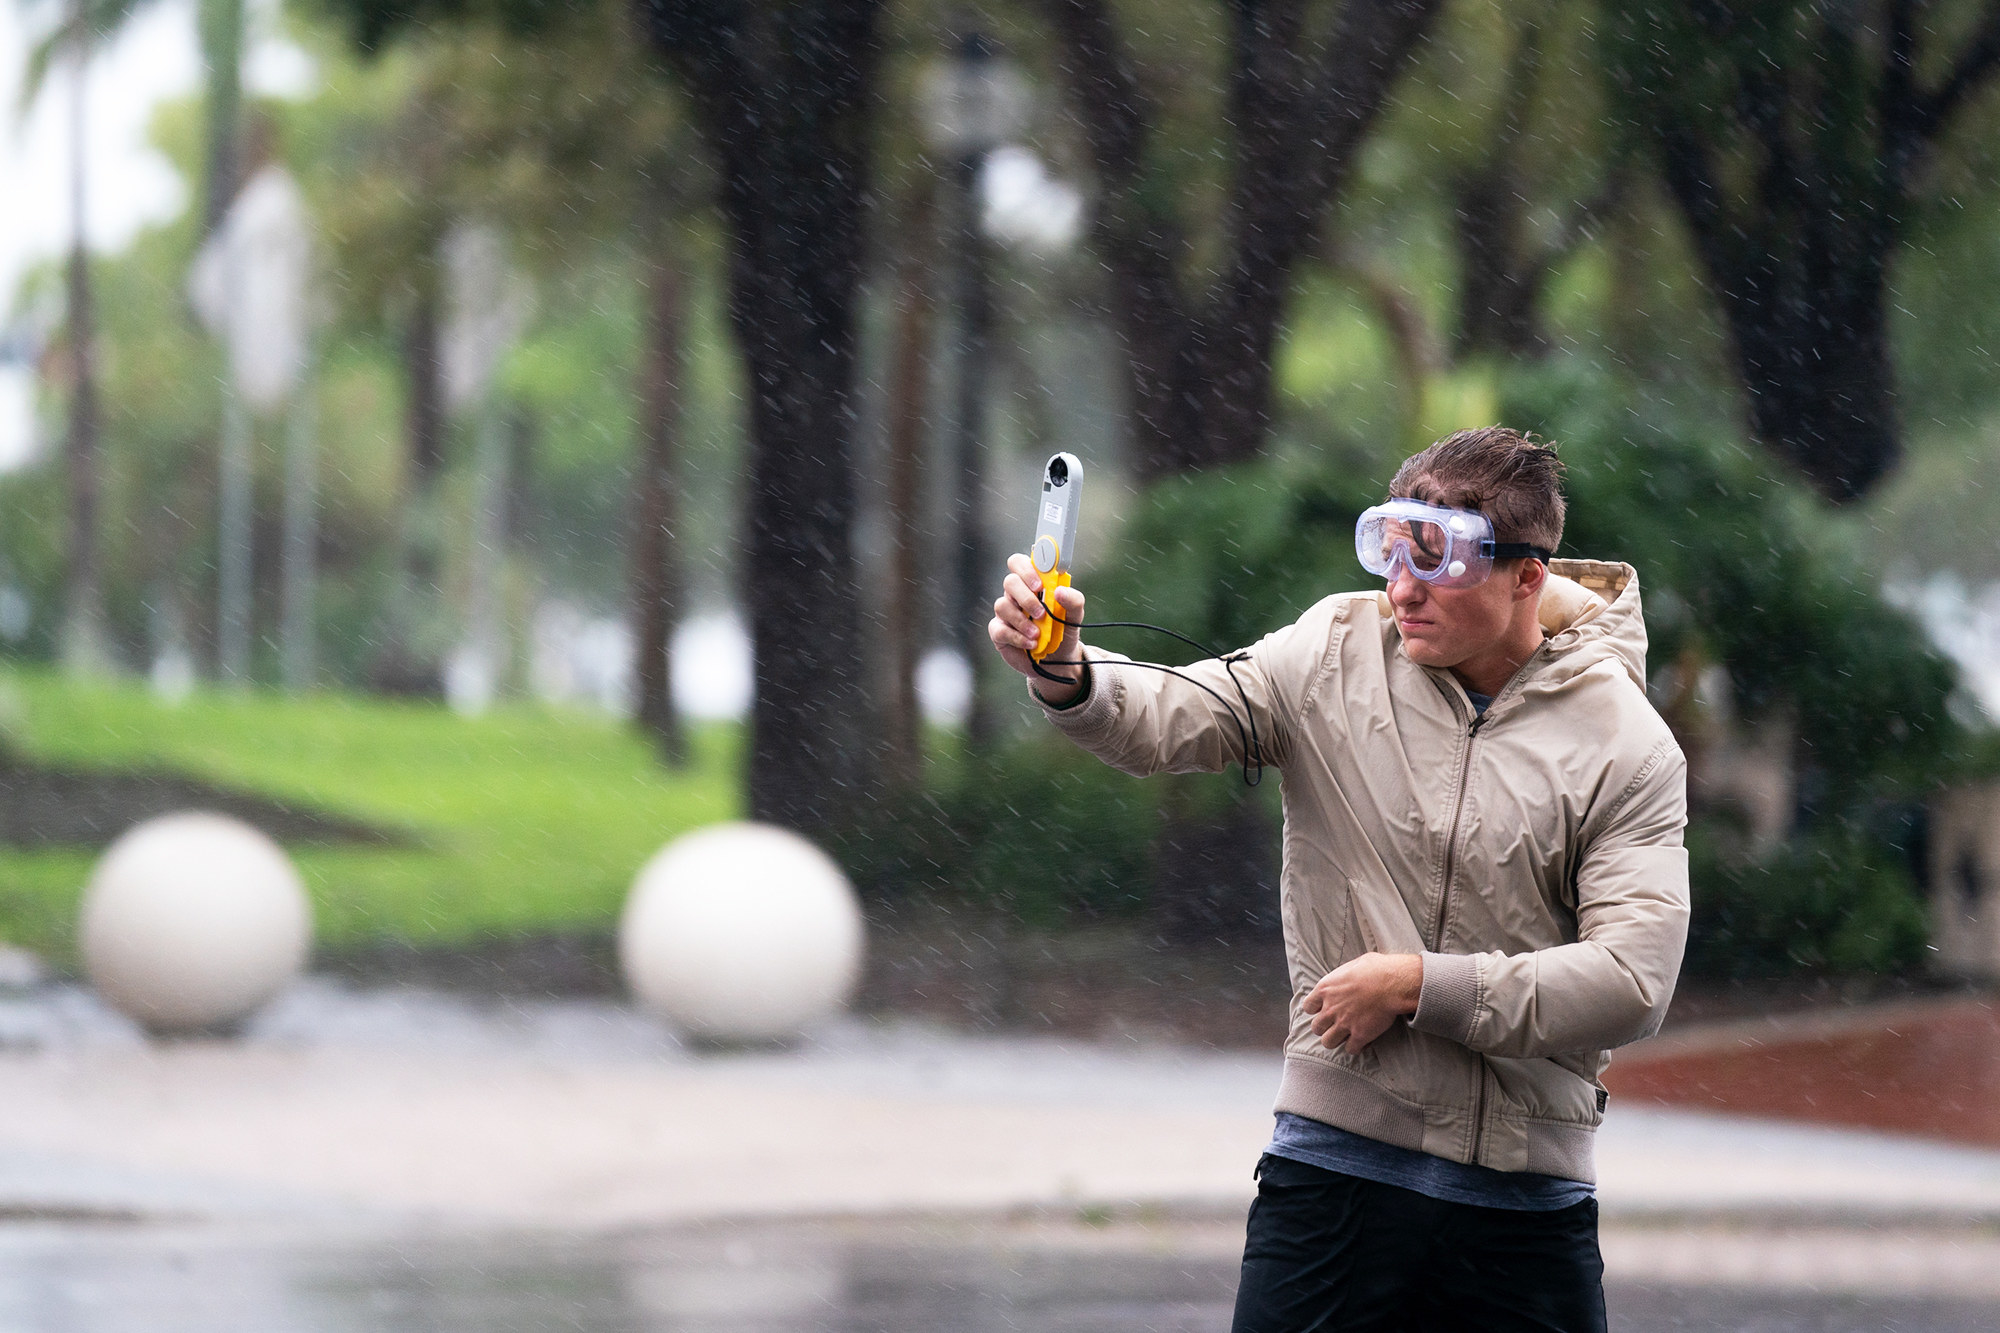 A person wearing safety goggles braces as they hold up a measurement instrument in the wind and rain